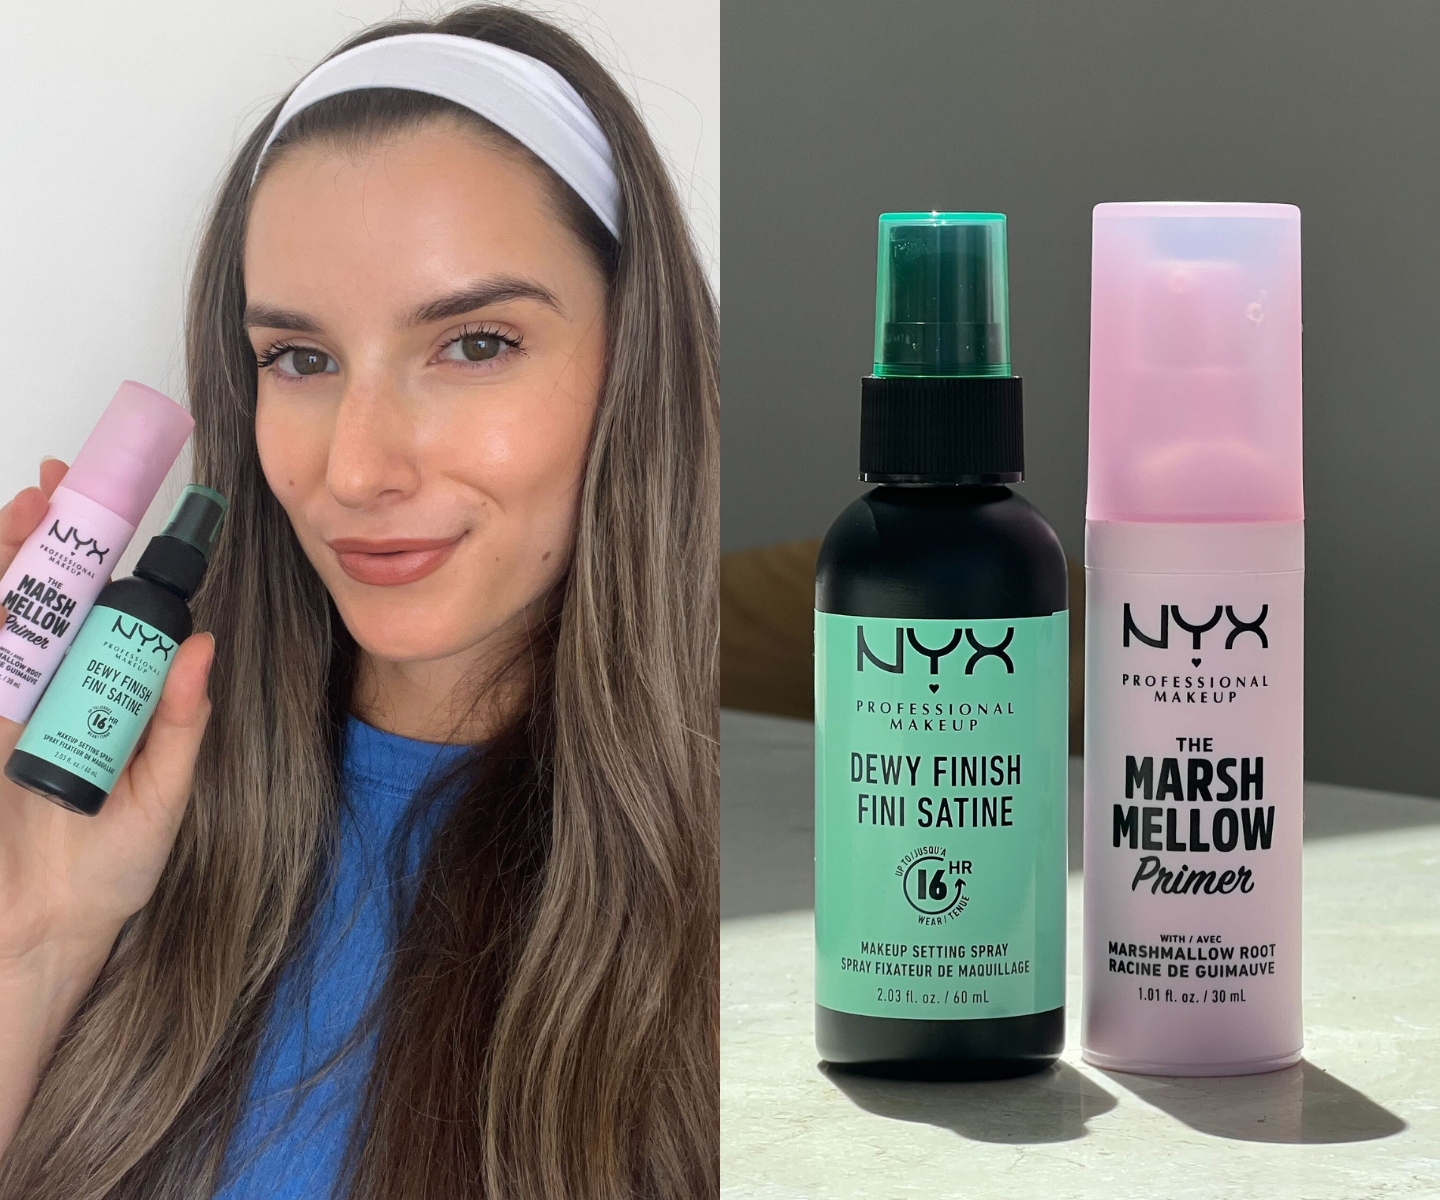 The Two NYX Products That You Glowy for Longer Lasts Makeup Need